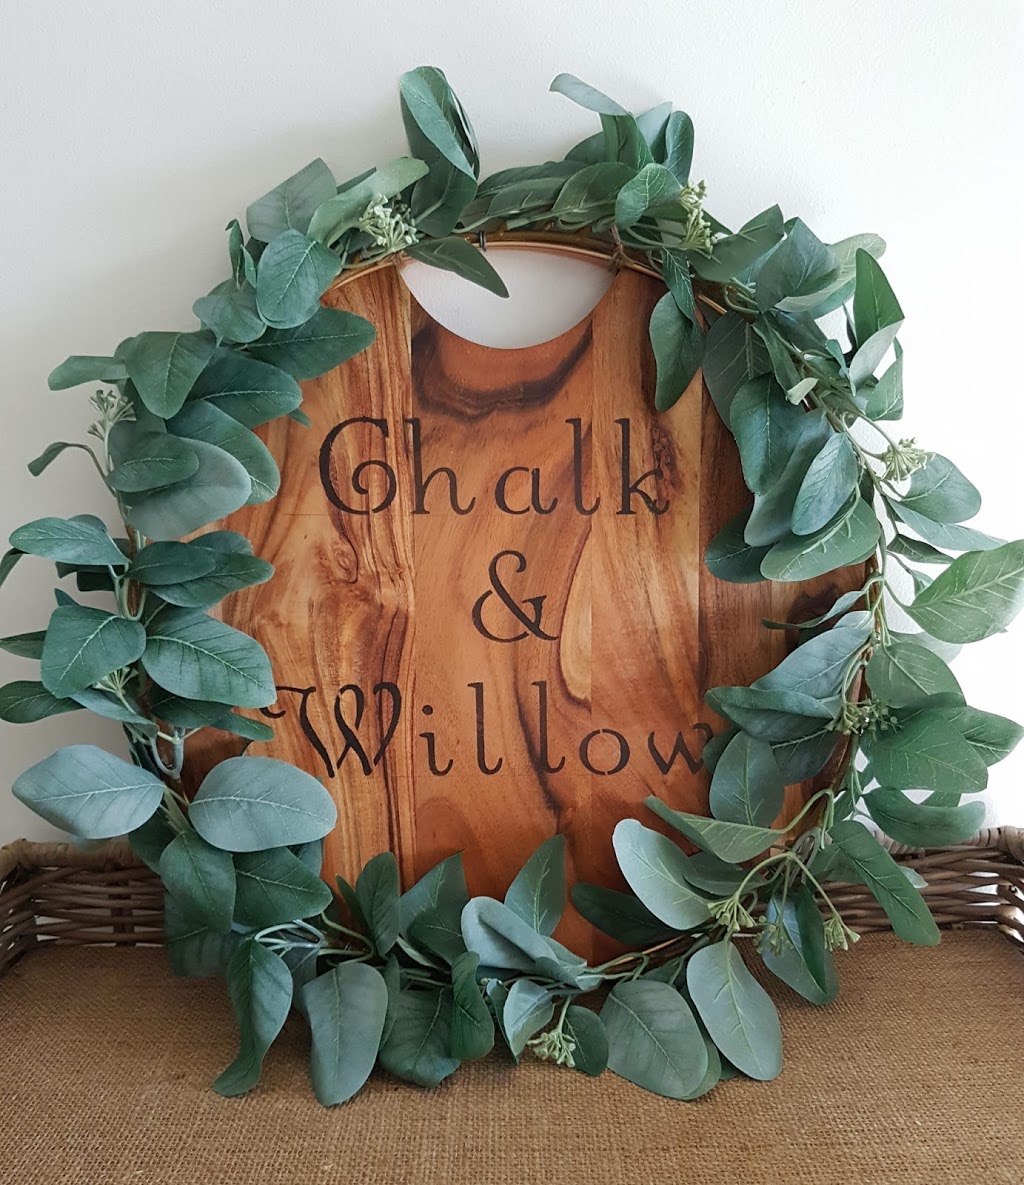 Chalk and Willow | home goods store | 8 Echo Pl, One Mile NSW 2316, Australia | 0423530022 OR +61 423 530 022